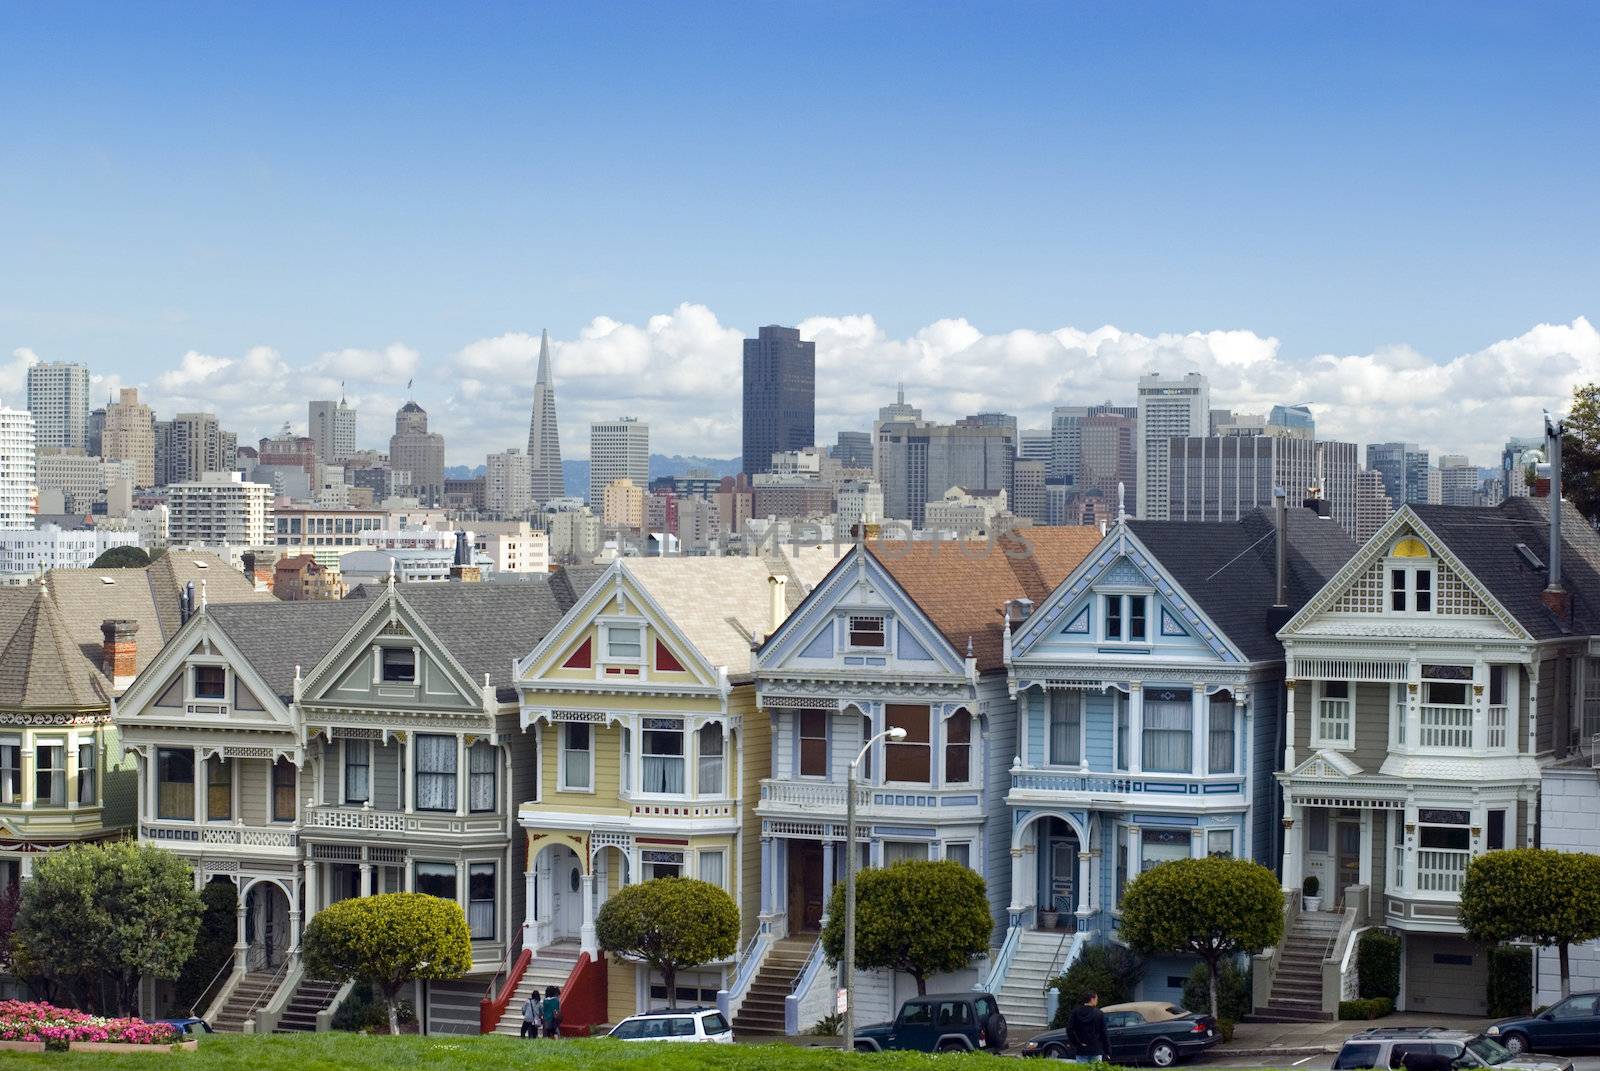 Historic and colourful victorian era houses at Alamo square with the San Francisco city skyline in the distance